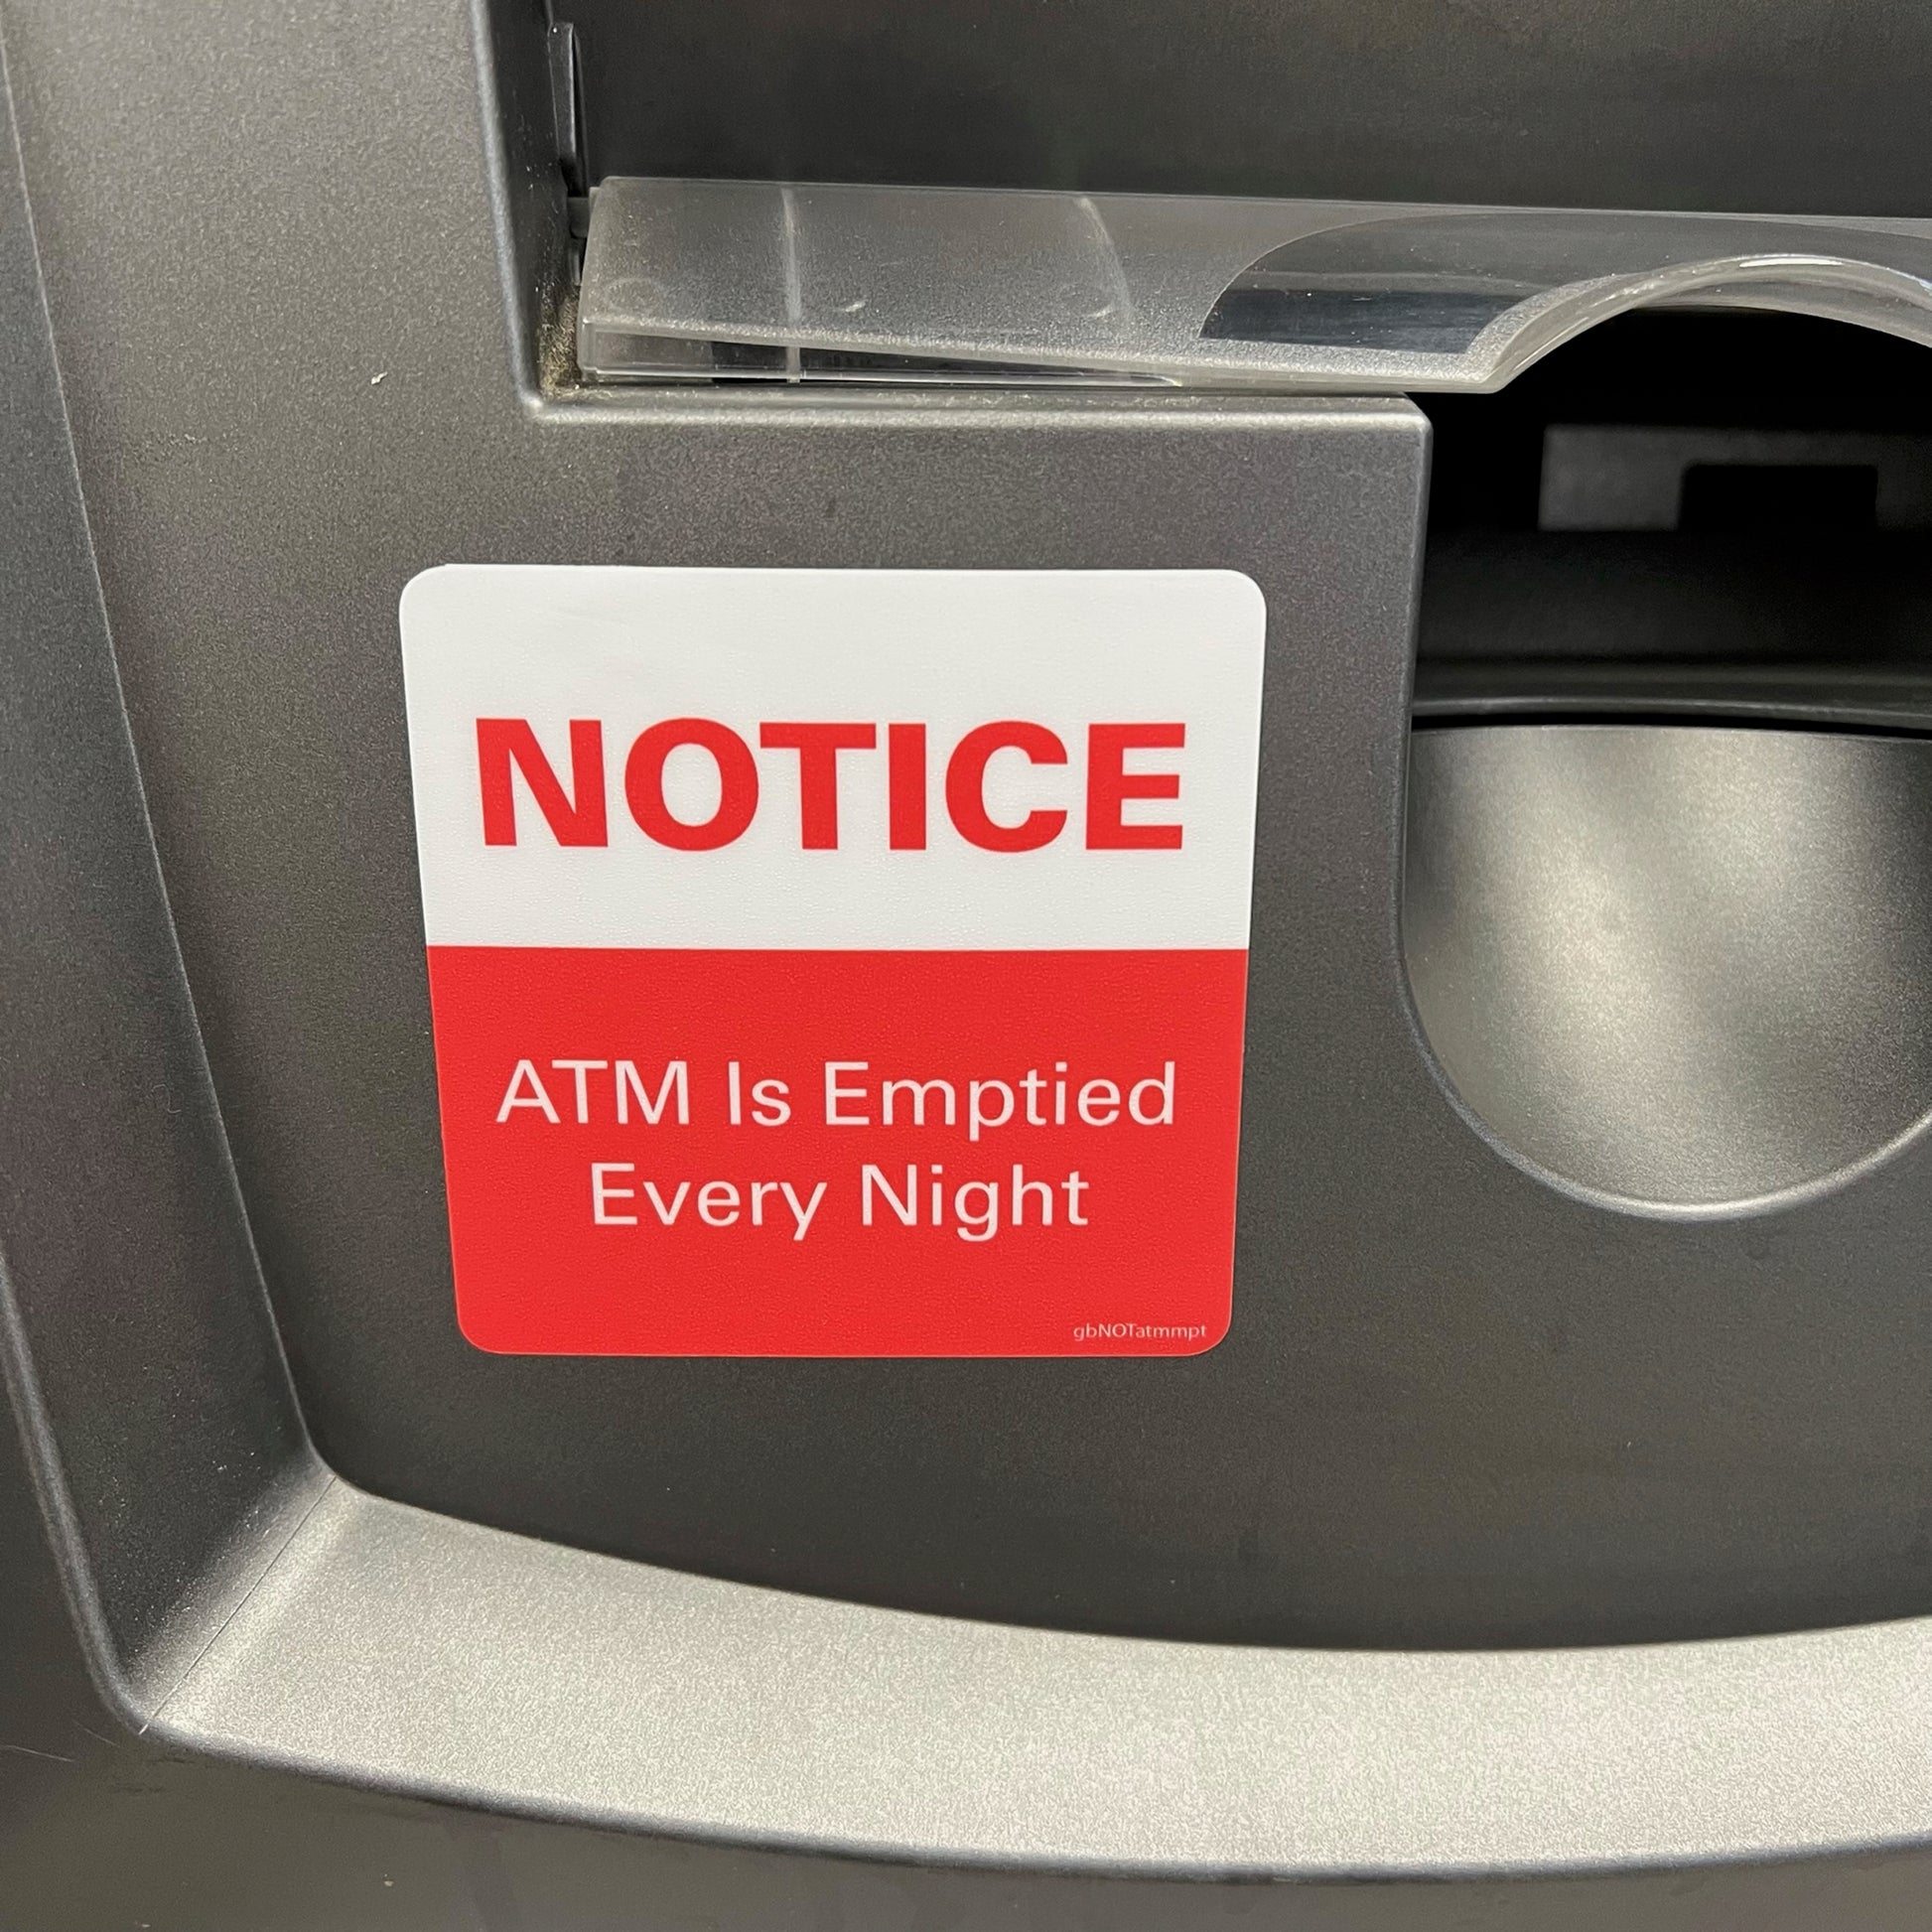 ATM is Emptied Every Night Notice Decal Image.